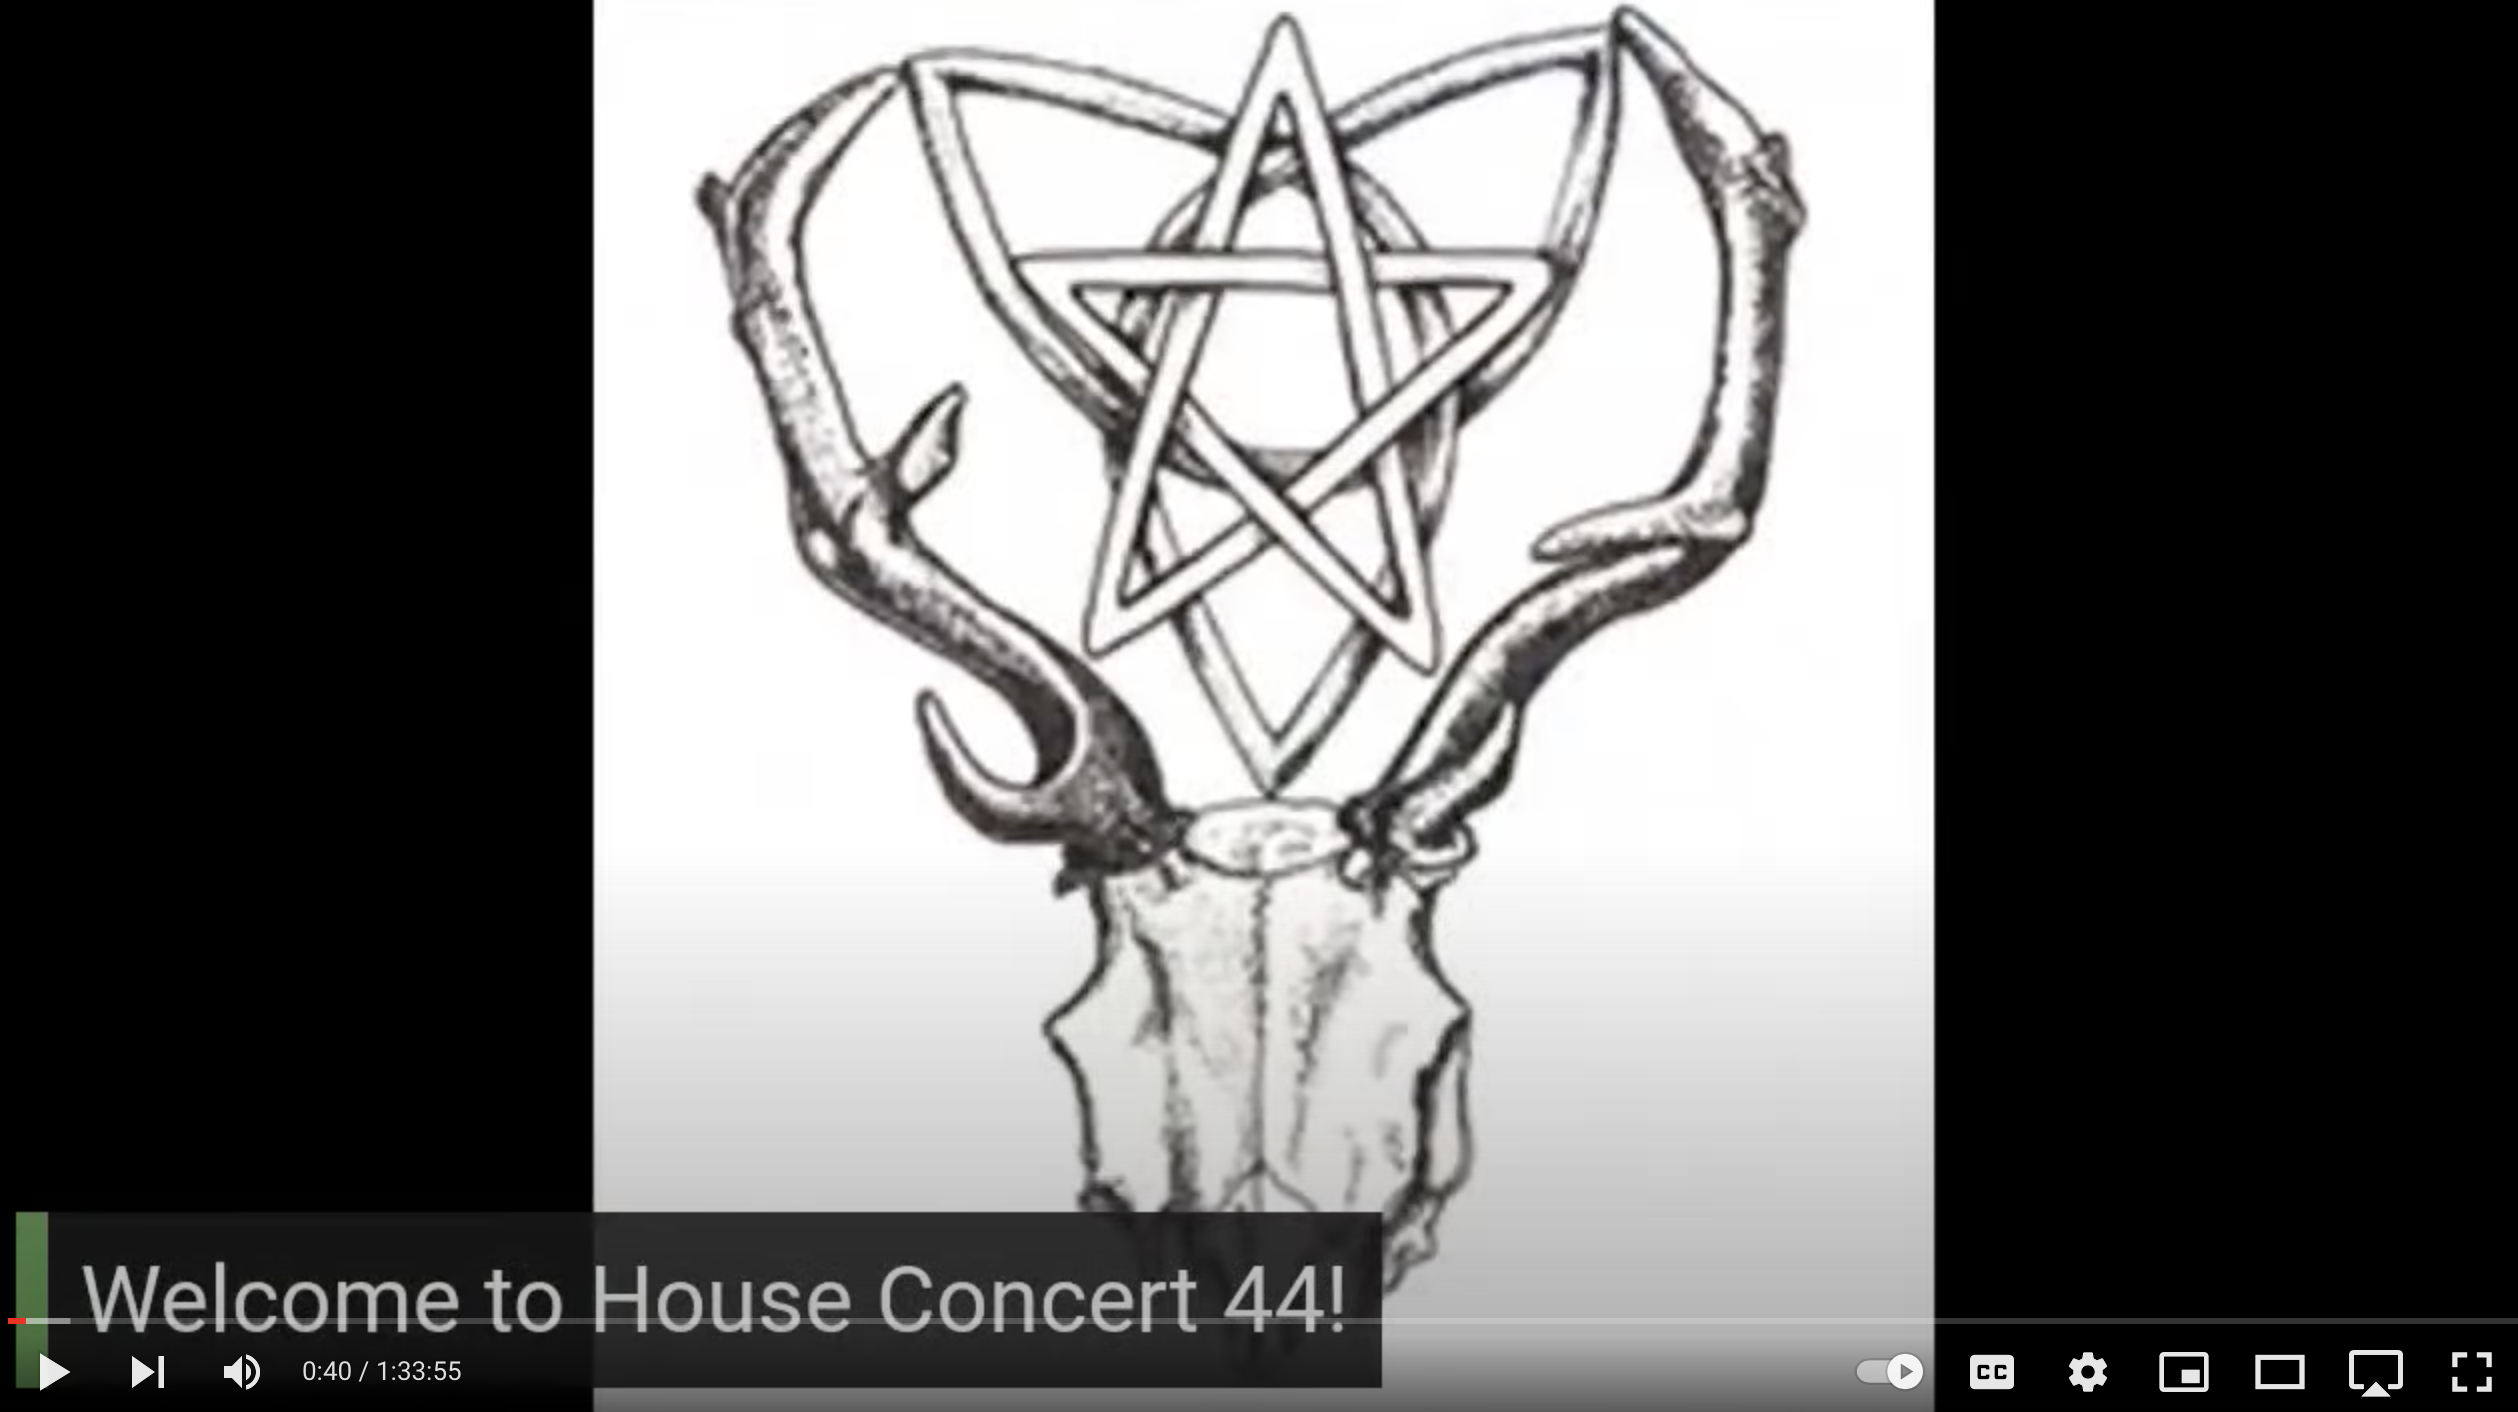 Video of House Concert 44